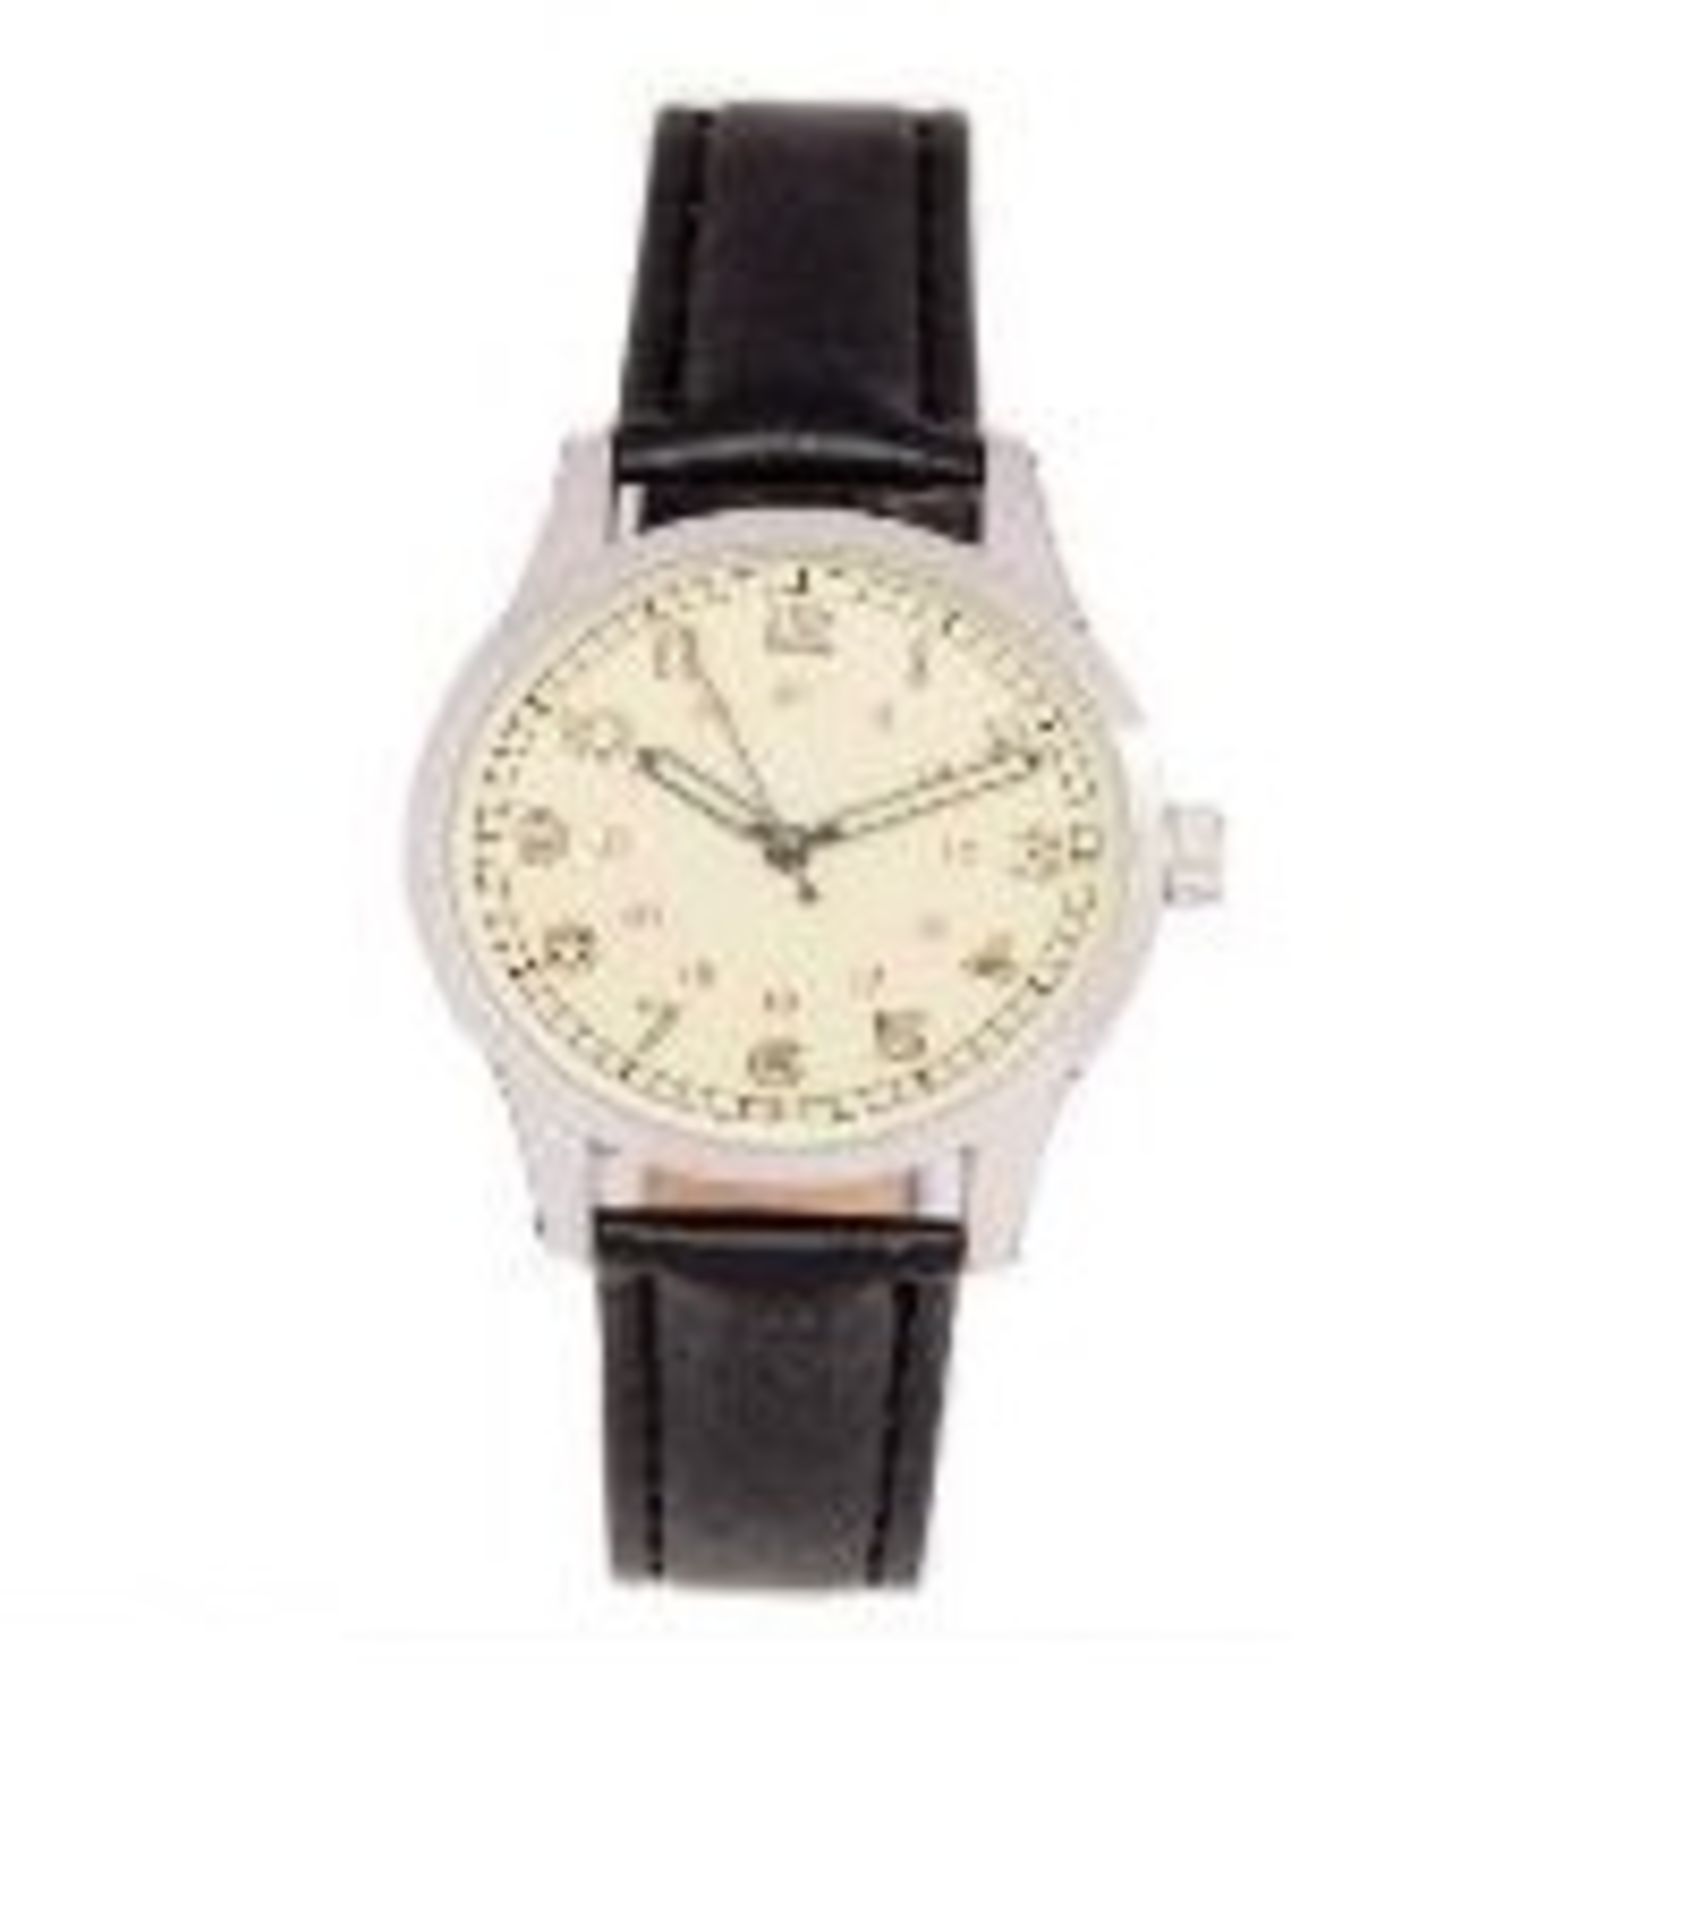 + VAT Brand New Gents 1940s American Seamans Watch With Engraved Back & Presentation Box - Image 2 of 2